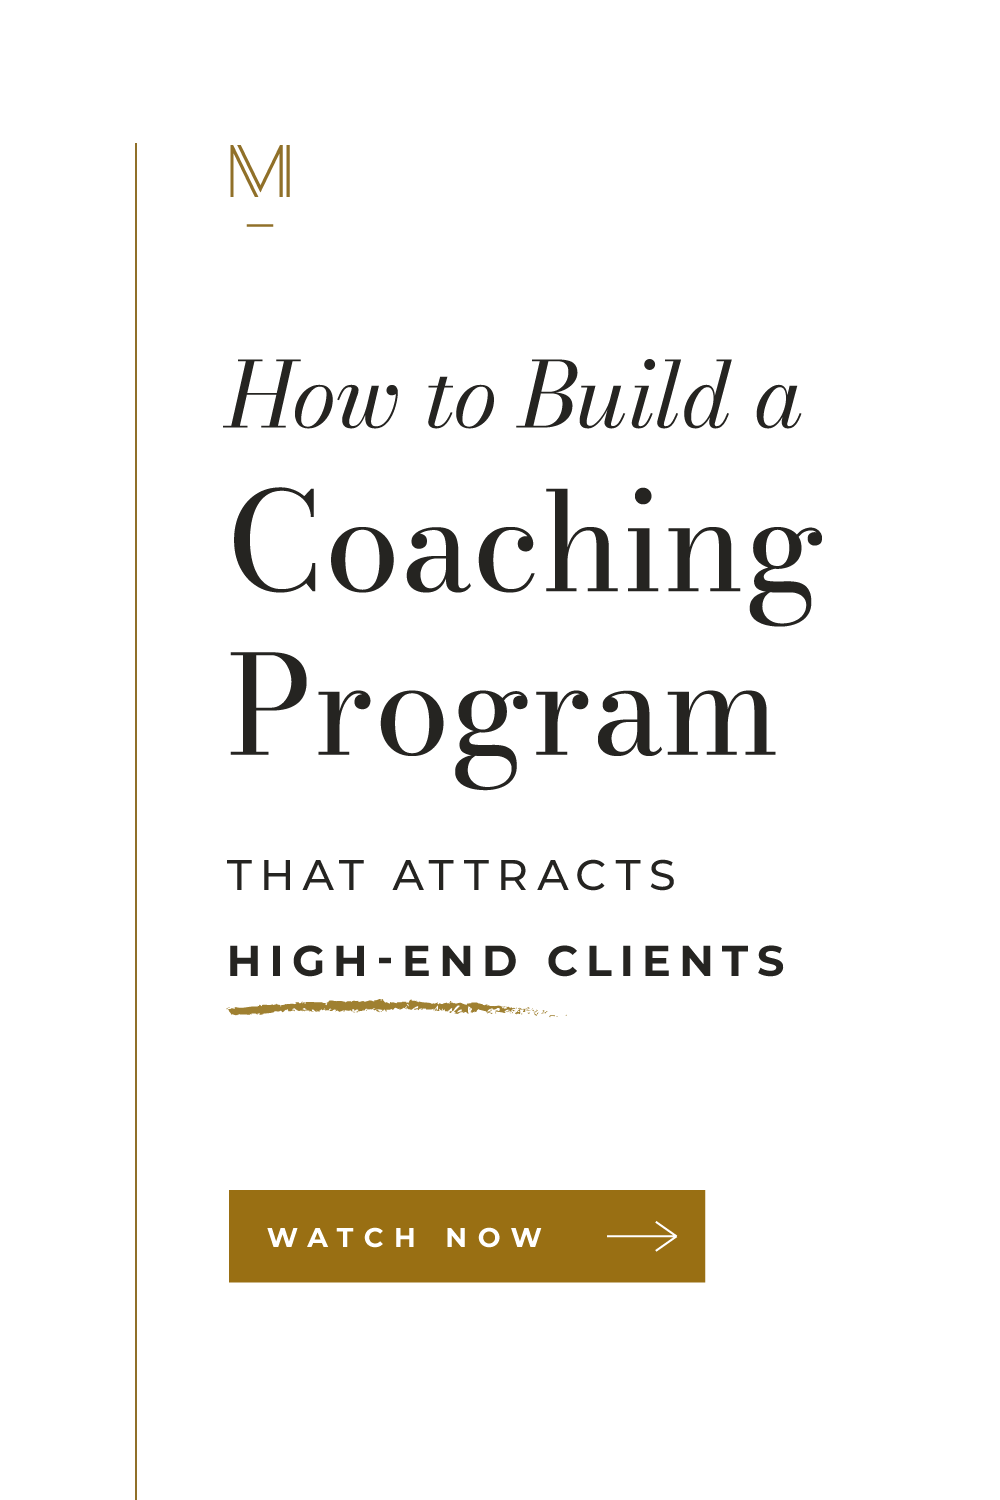 Are you a life coach or health coach looking to create and market your own signature coaching program to attract high ticket sales? Are you unsure of where to start? If so, you’ve come to the right place! With this guide, you will learn how to create and market your signature coaching program for maximum success. You will also receive a step-by-step template to help you strategize and create your signature coaching program quickly and efficiently.